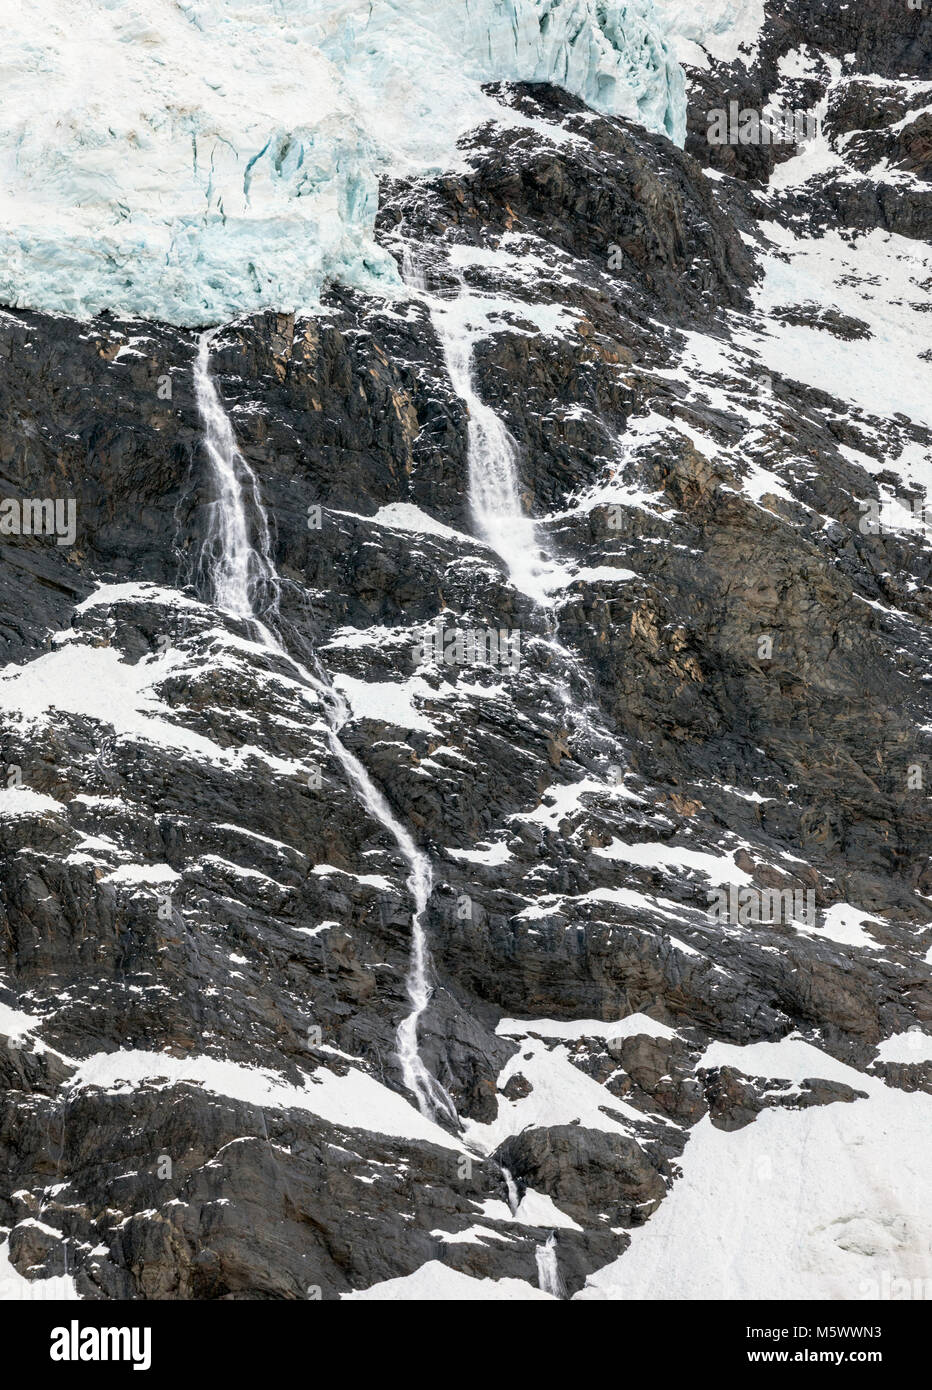 Waterfalls from snow melt; face of Glaciar Frances; Torres del Paine National Park; Chile Stock Photo